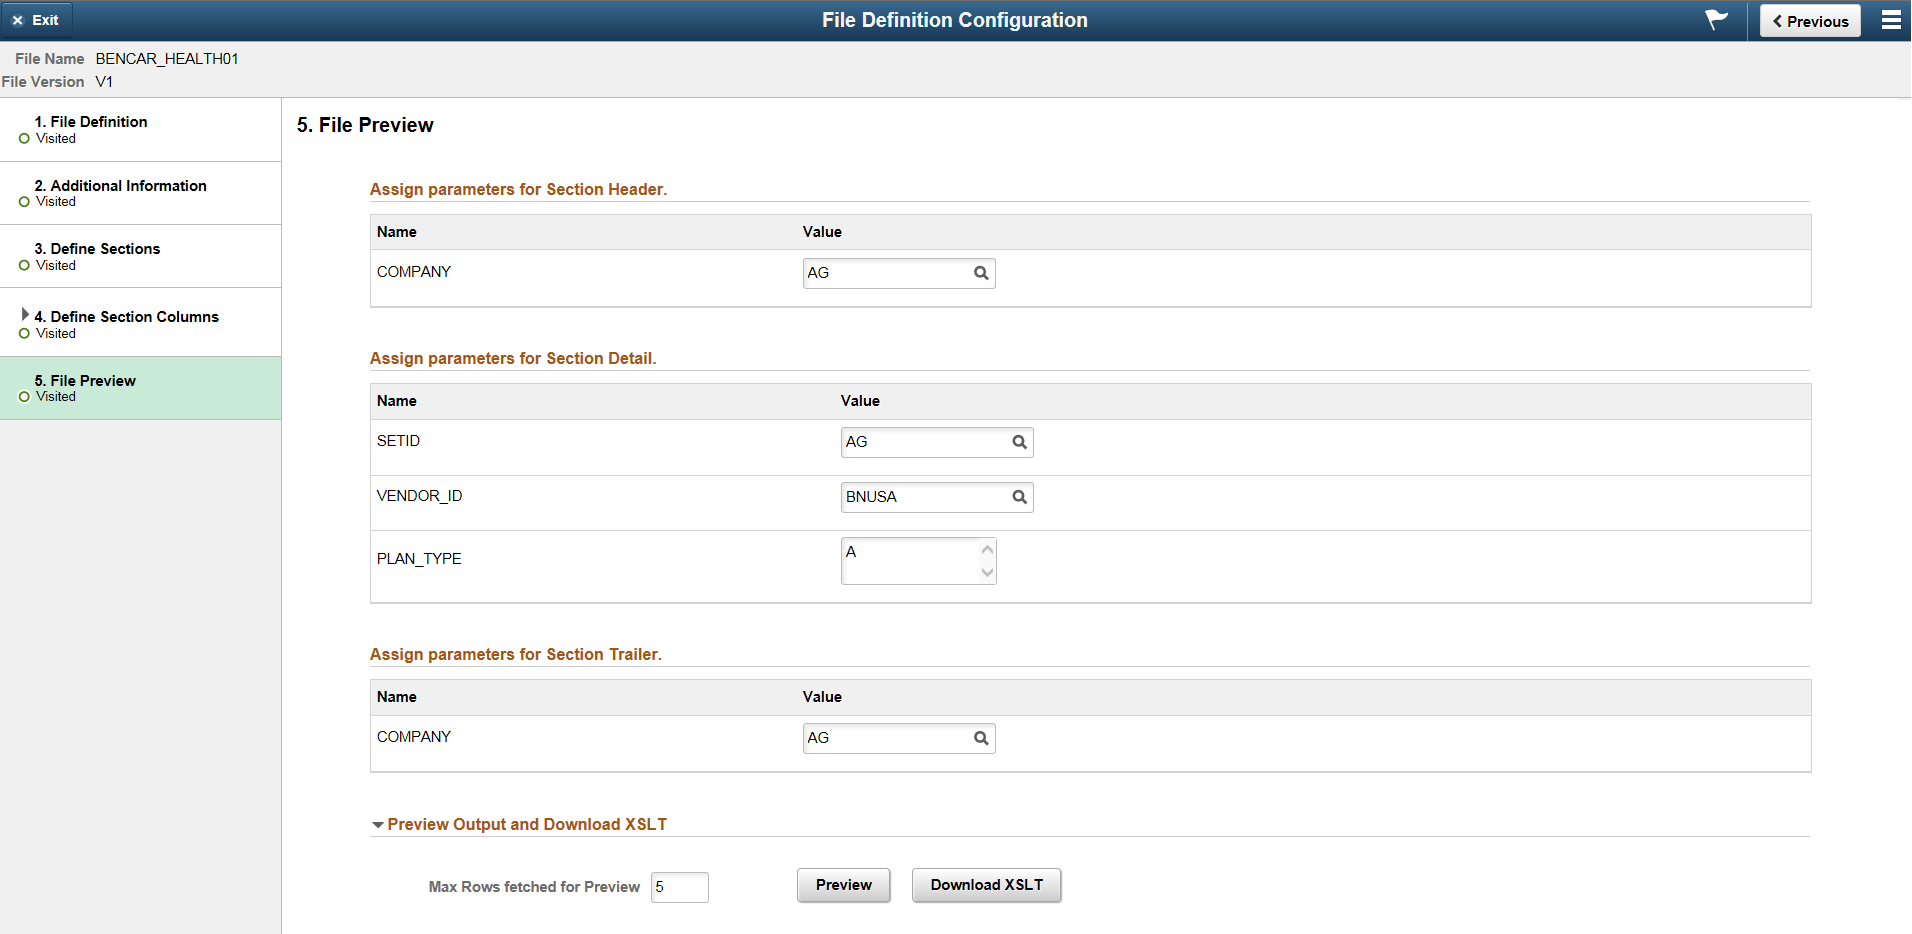 File Definition Configuration - File Preview Page